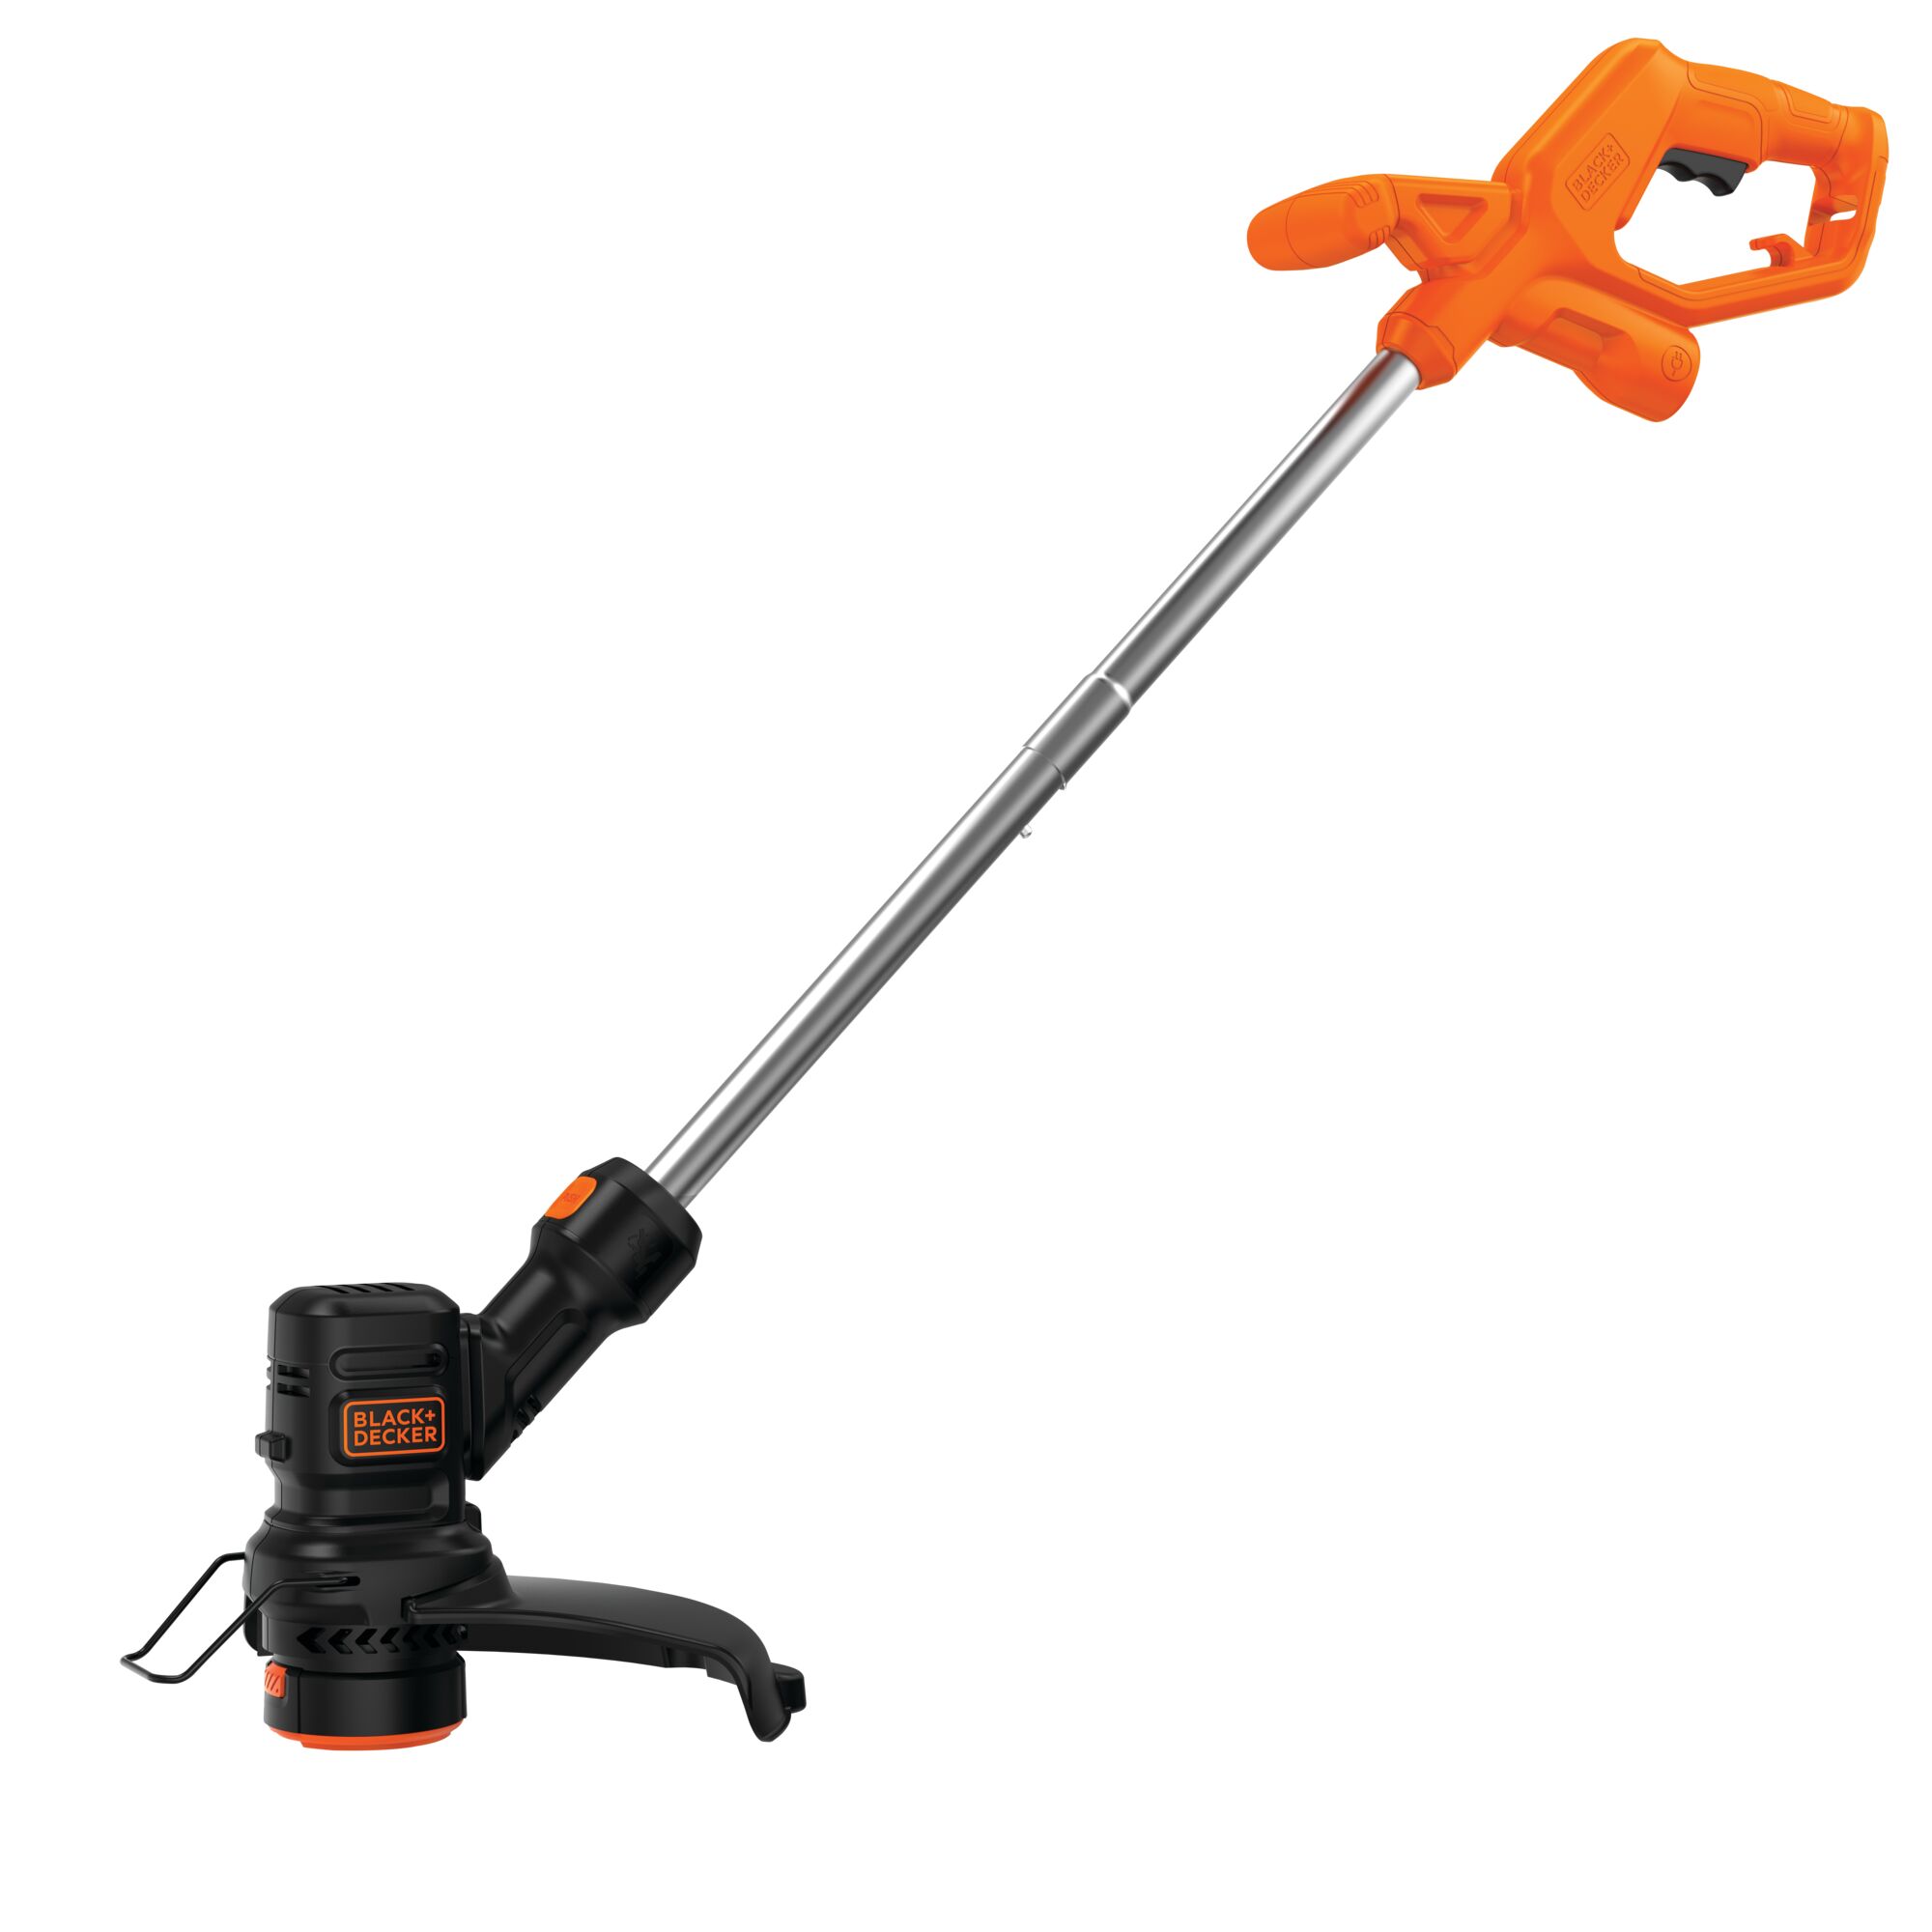 Profile of 4 Amp 13 inch Electric String Trimmer.